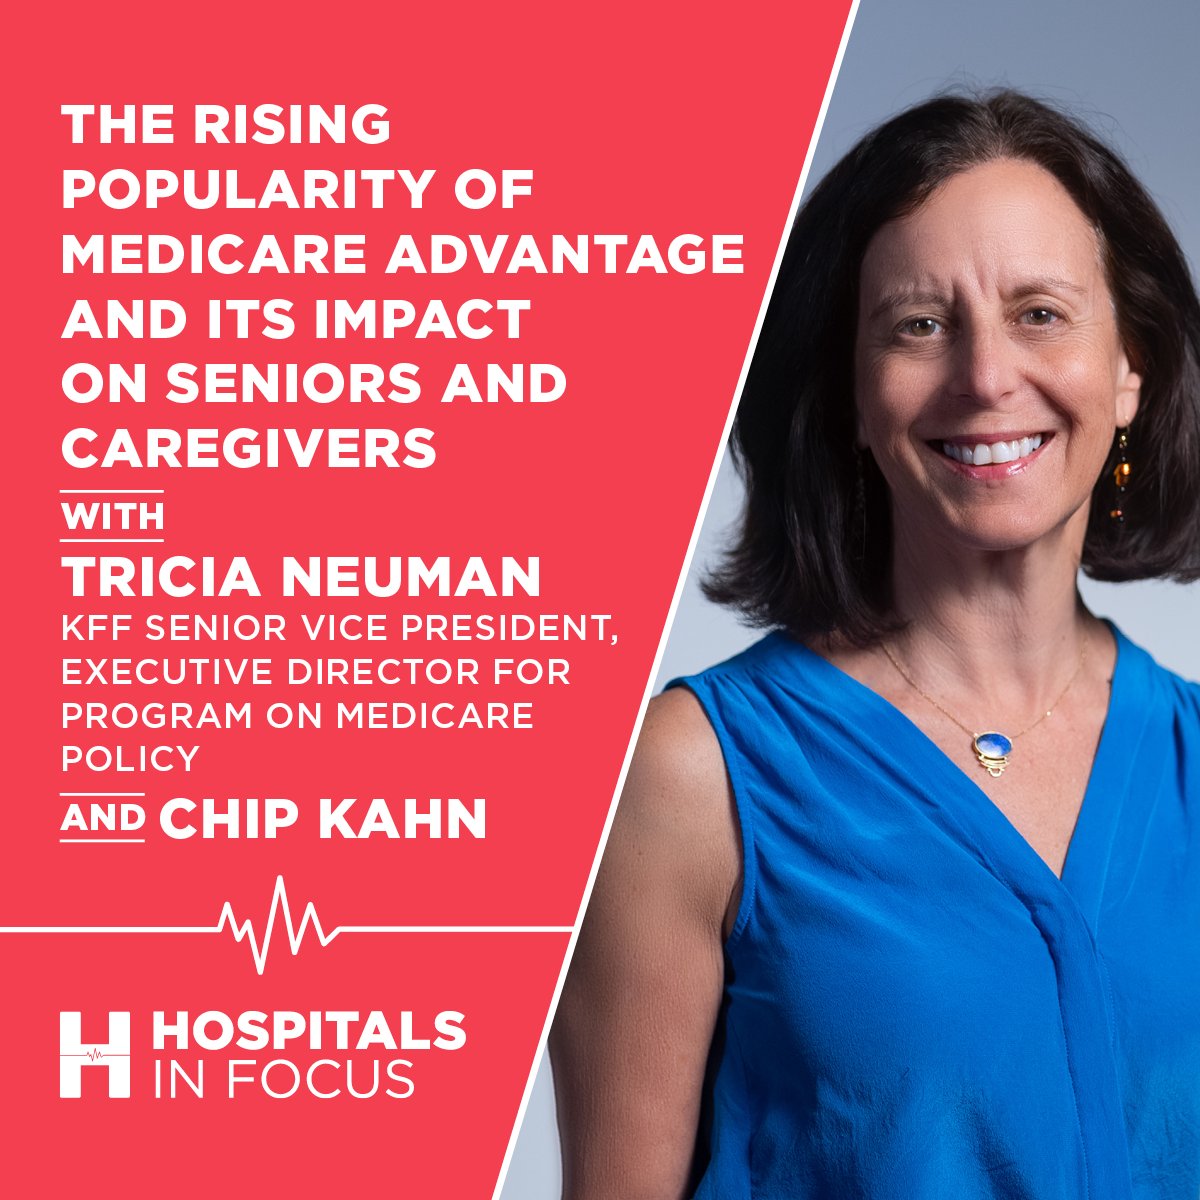 New episode of #HospitalsInFocus! @chipkahn talks w/ @tricia_neuman @KFF about the rise of Medicare Advantage plans. With over 50% of seniors now enrolled in MA, we explore its benefits, aggressive marketing & hidden downsides for patients, providers, & taxpayers.